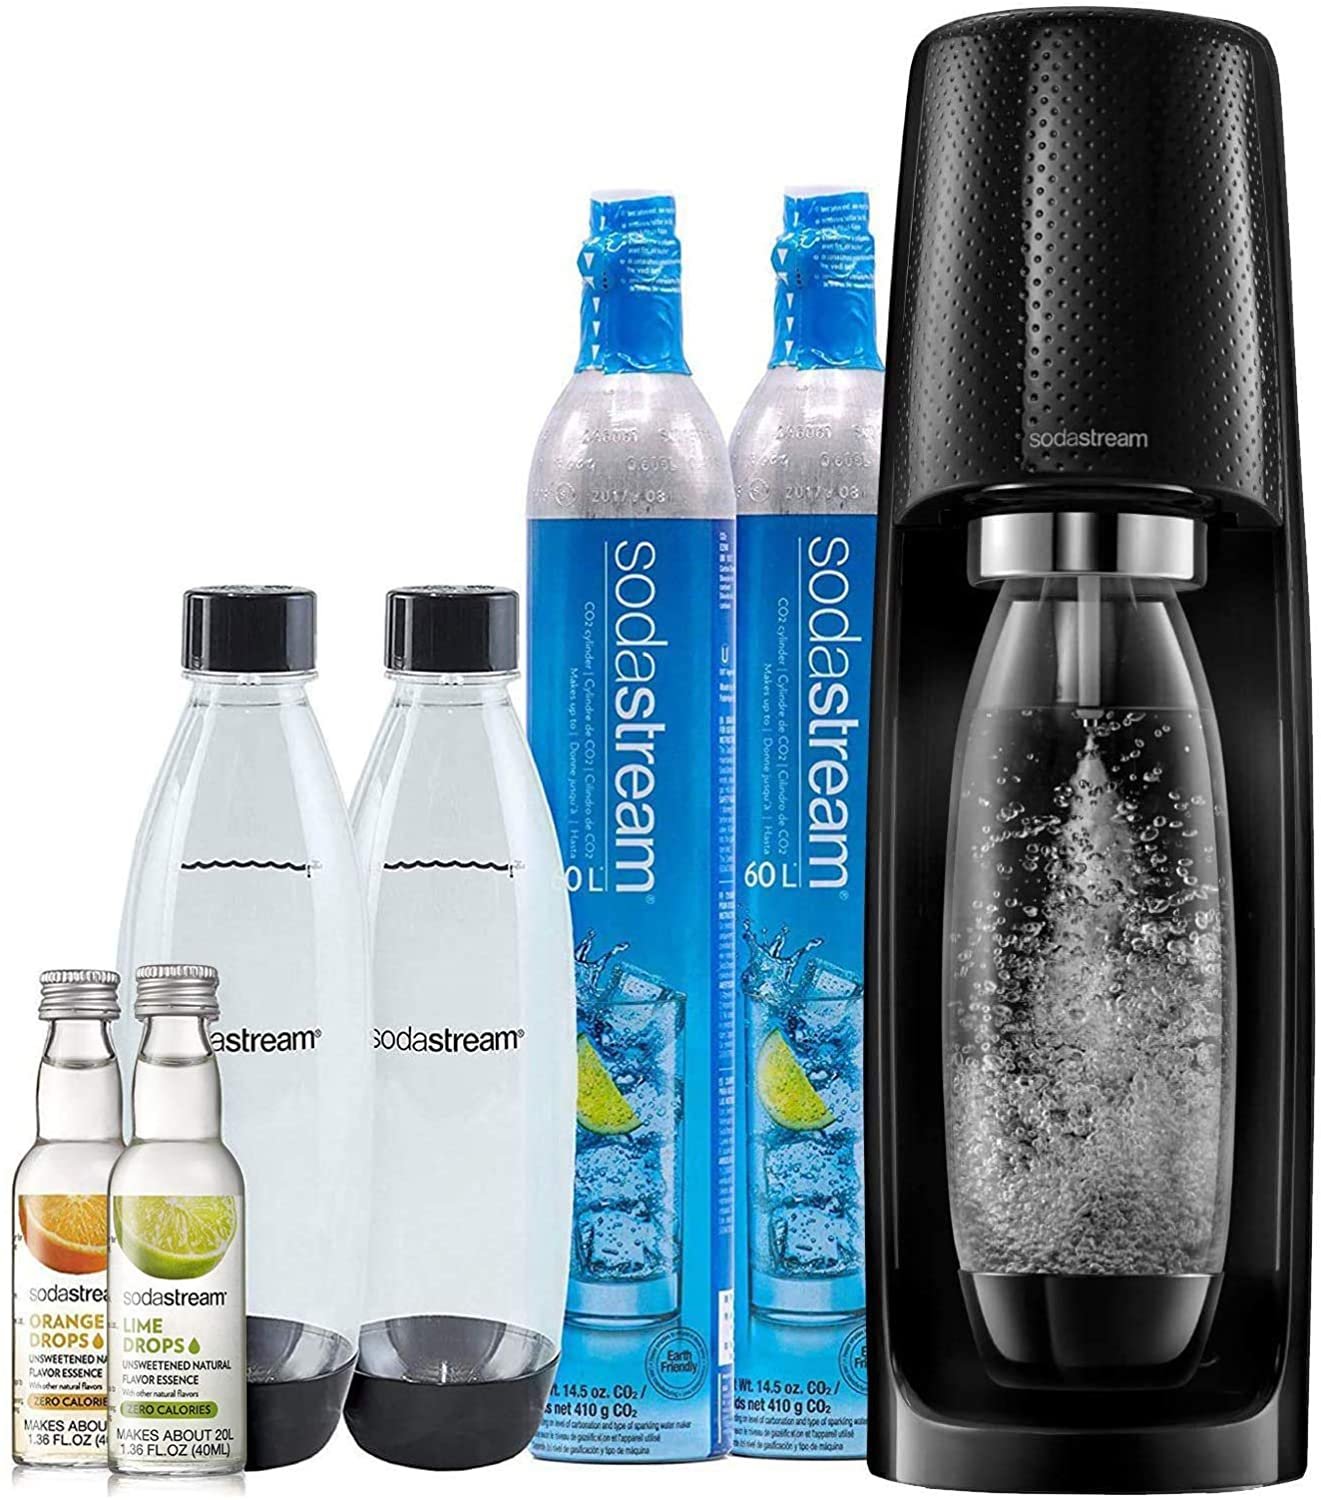 Sodastream machine with two bottles, two CO2 tanks, two flavor bottles